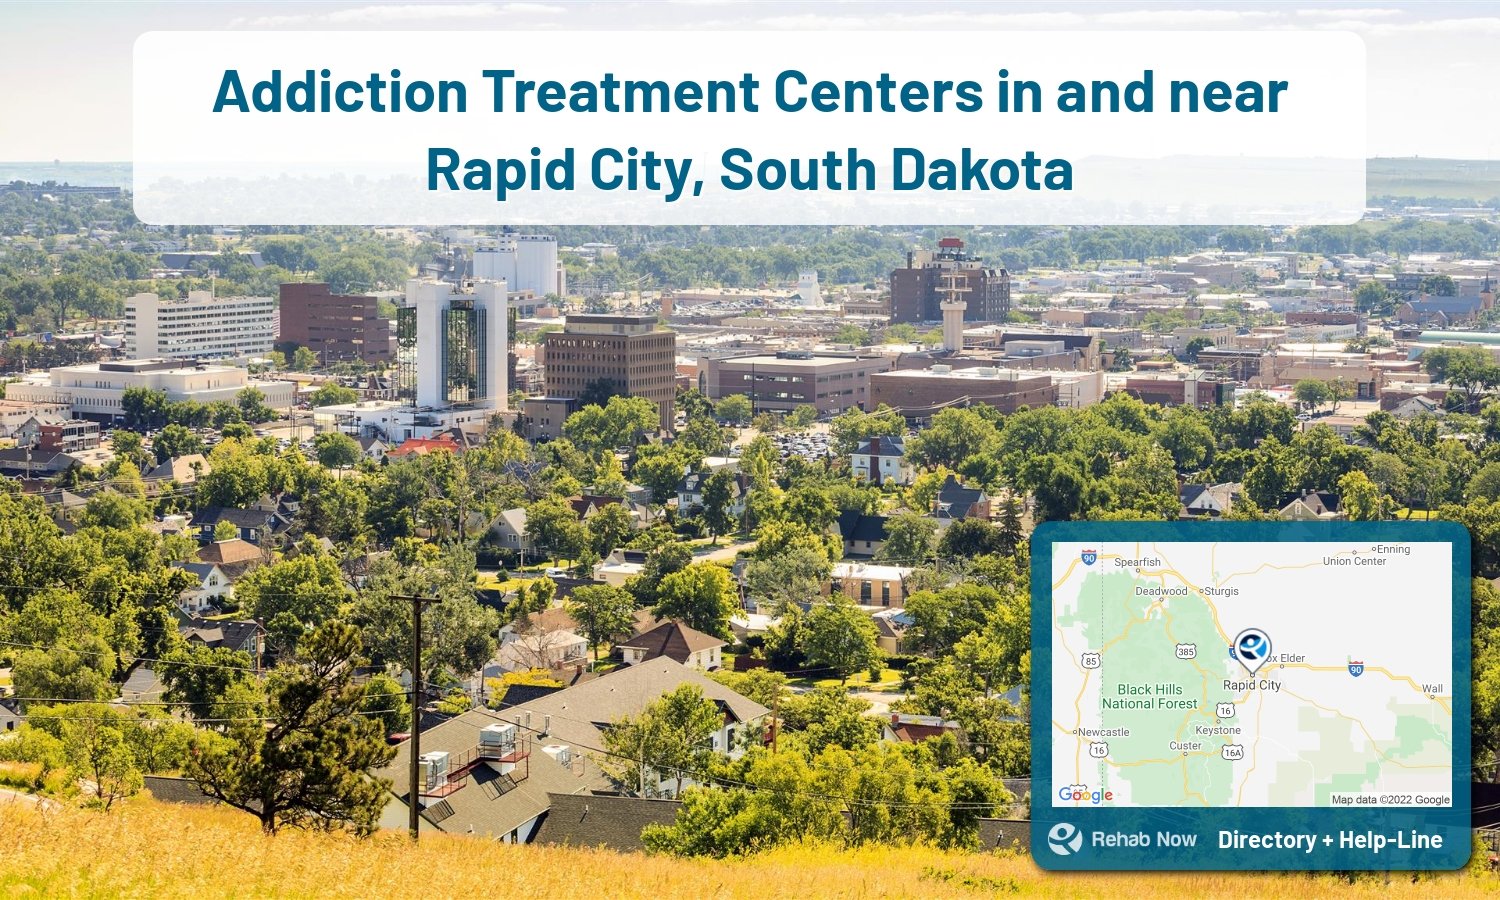 Our experts can help you find treatment now in Rapid City, South Dakota. We list drug rehab and alcohol centers in South Dakota.